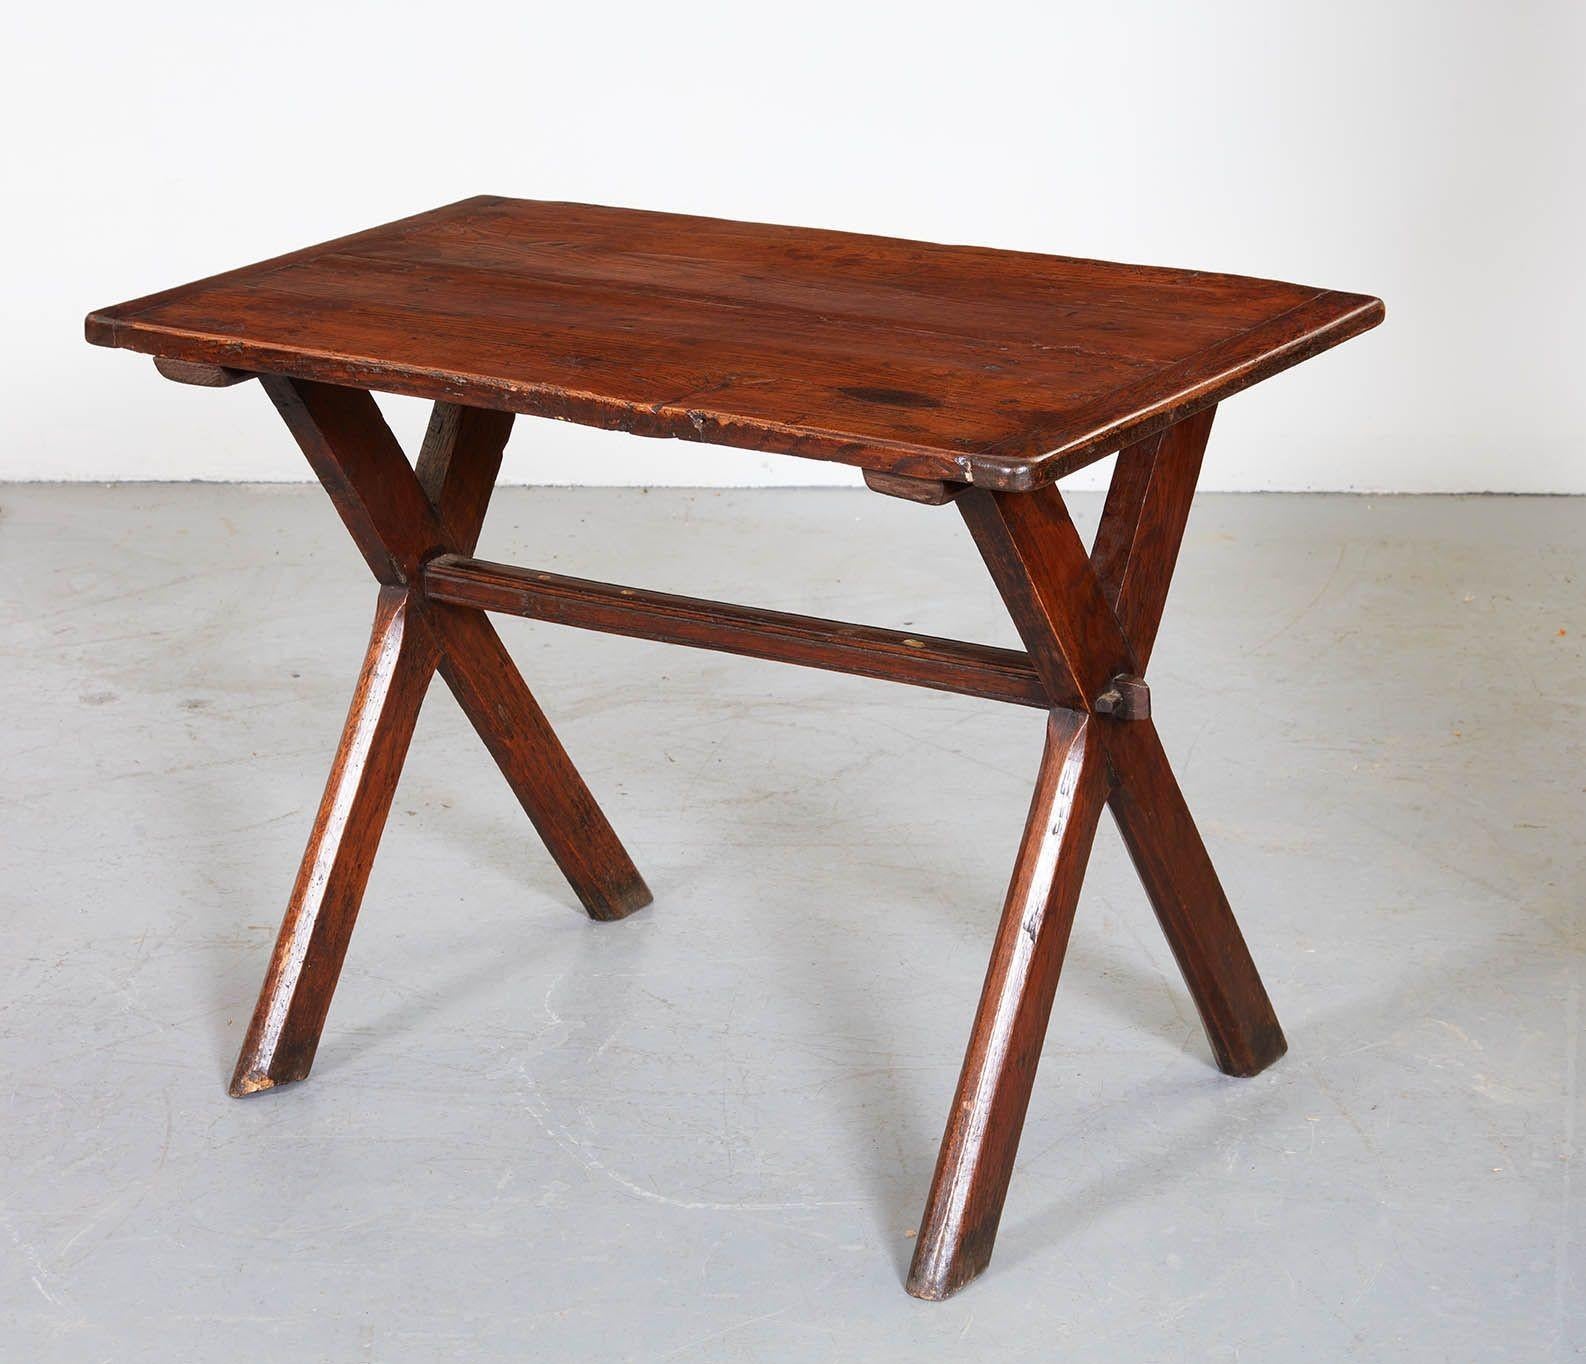 A 19th century oak tavern table having single board top with cleated ends on graphic X-frame base joined by peg and driven chocks and center stretcher. Graphic form, useful small scale, mellow patina and good nutty color.